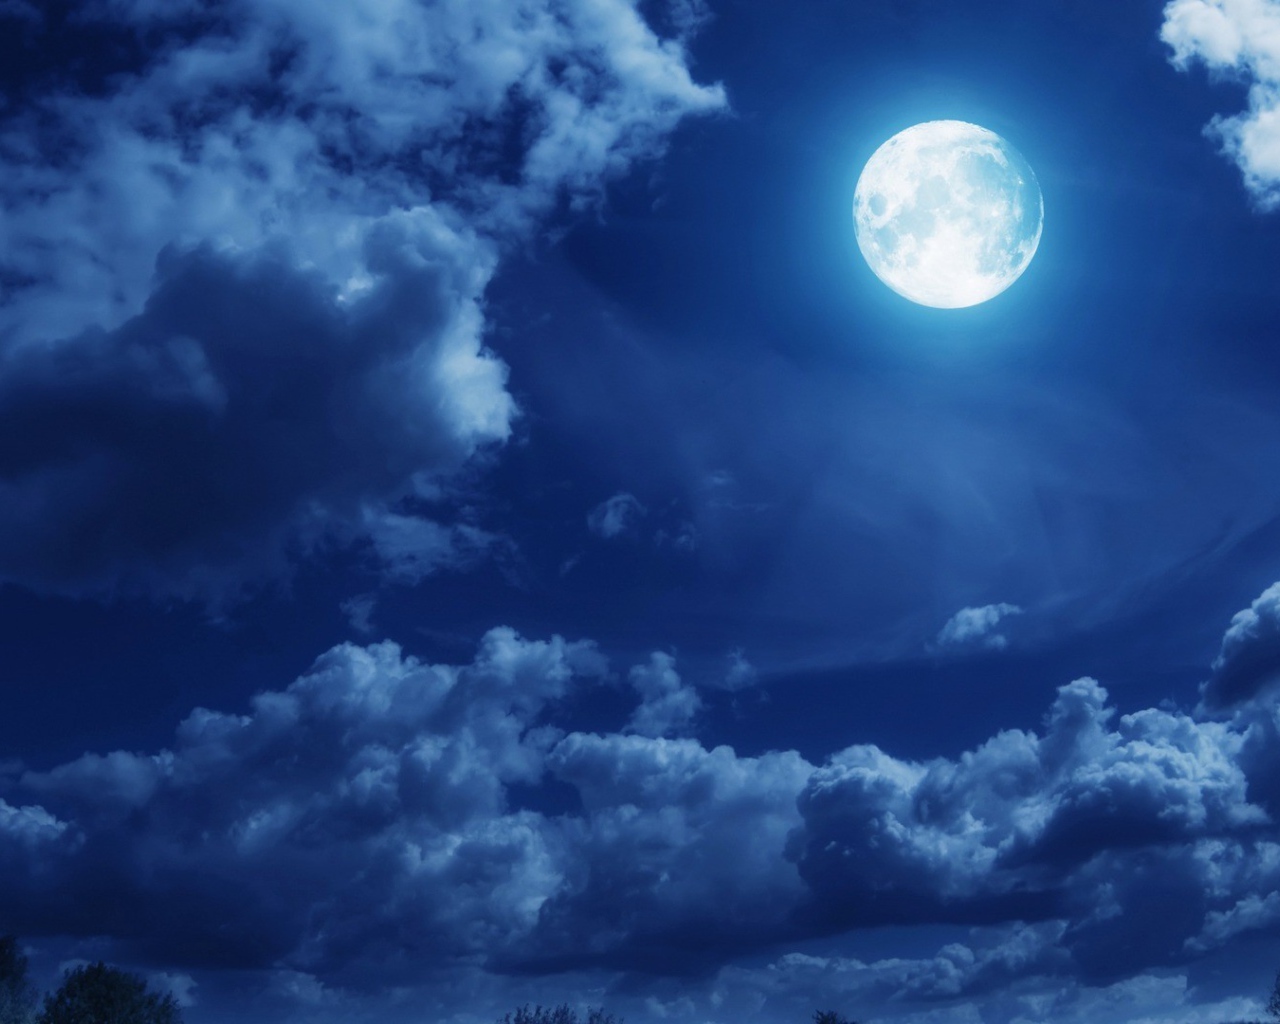 Clouds in the moonlit night